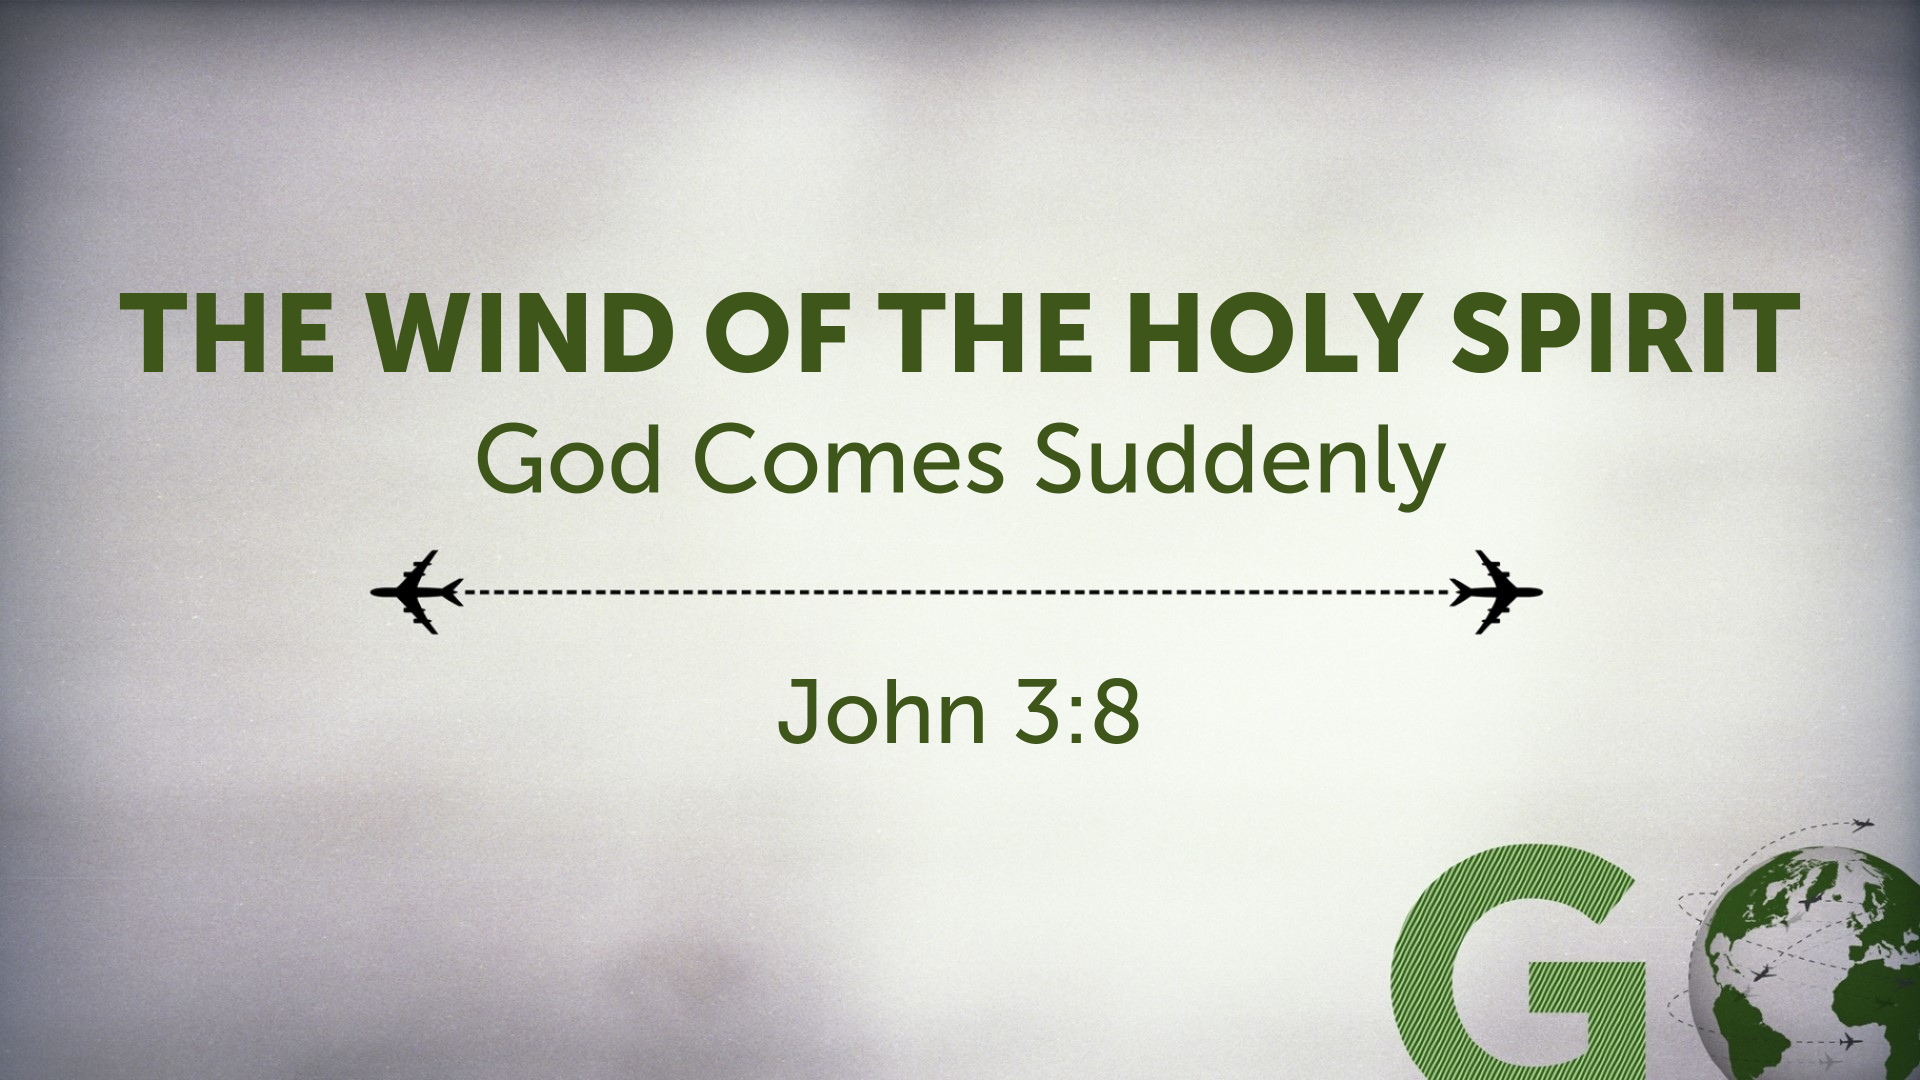 THE WIND OF THE HOLY SPIRIT